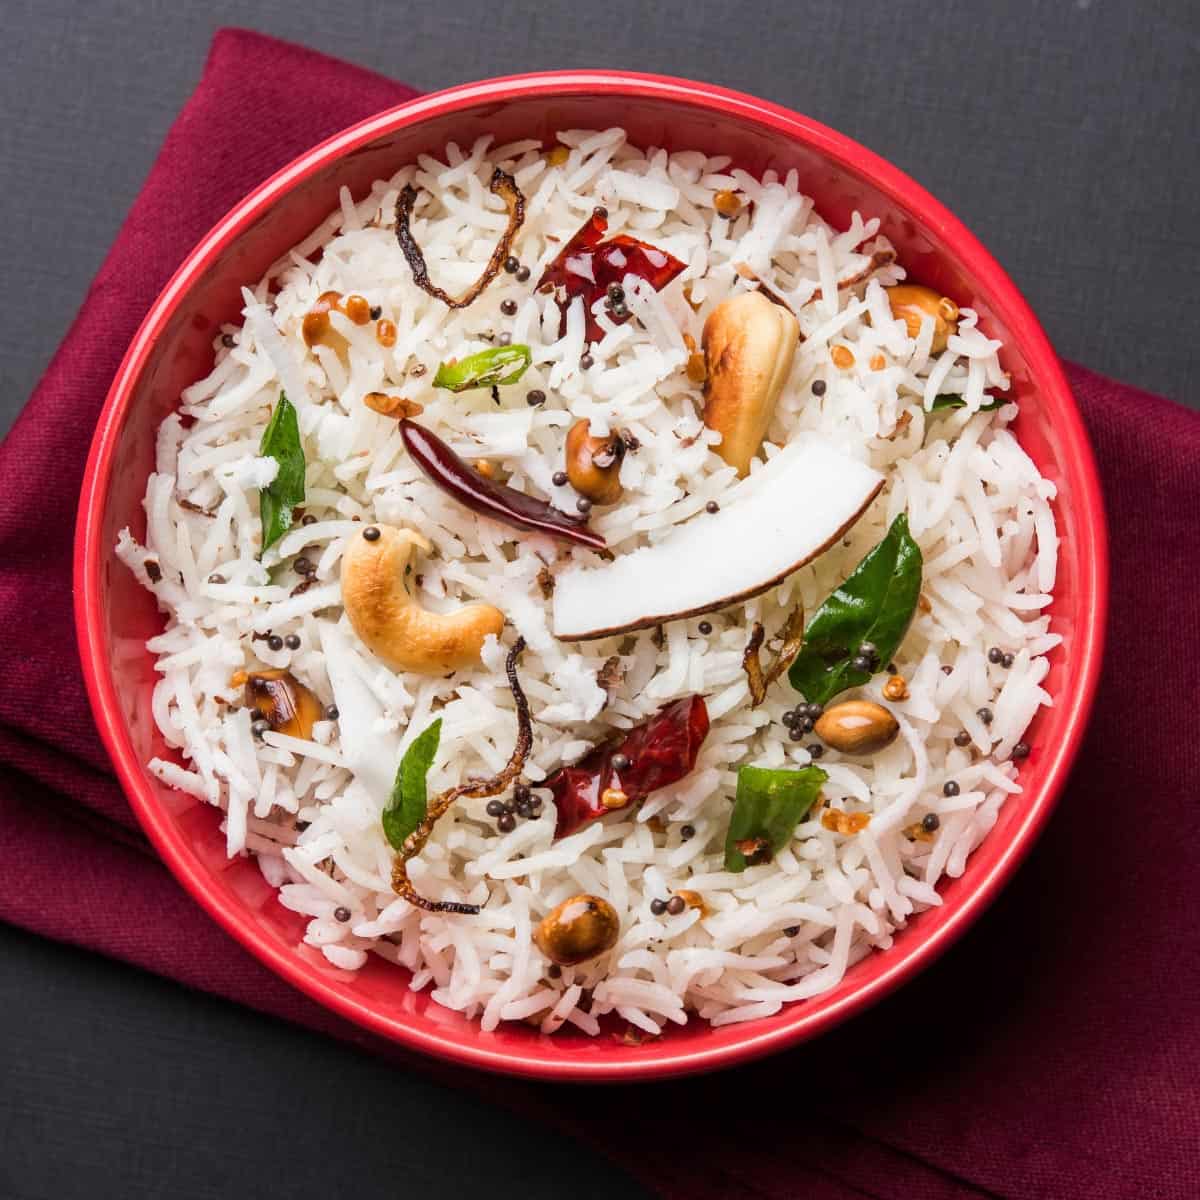 Coconut rice with cashew, herbs, and spices in a red bowl.